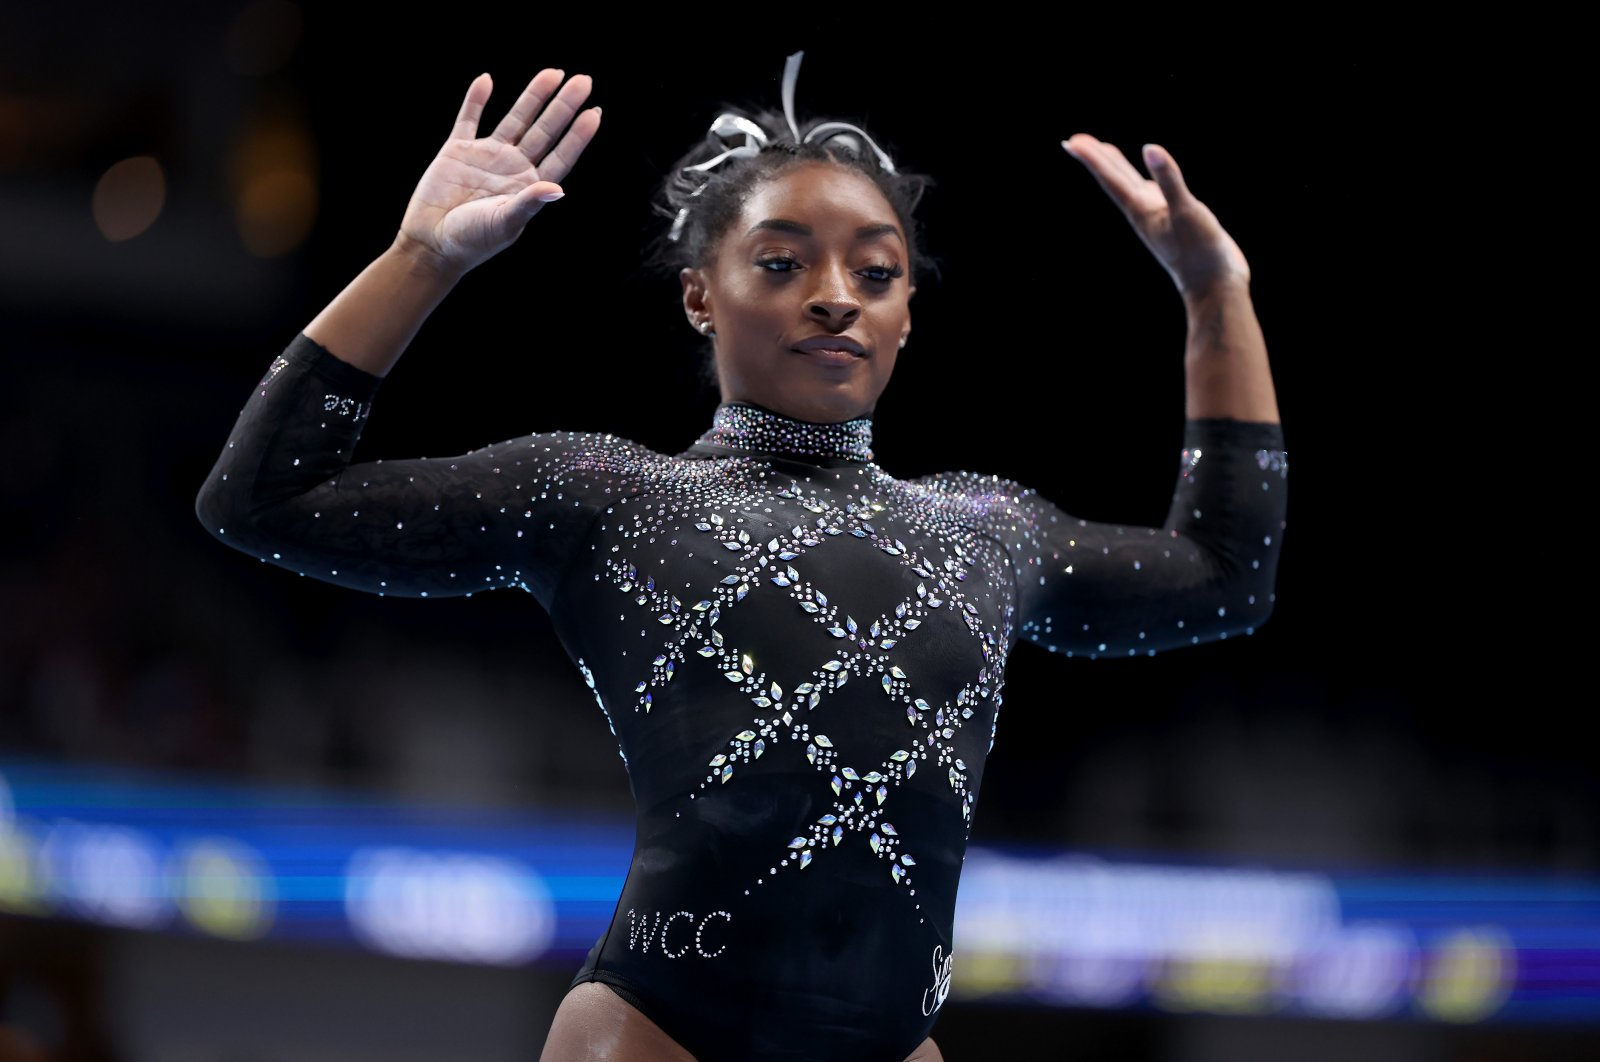 Simone Biles competes in the floor exercise on Day 4 of the 2023 U.S. Gymnastics Championships at SAP Center, San Jose, California, U.S., Aug. 27, 2023. (Getty Images Photo)